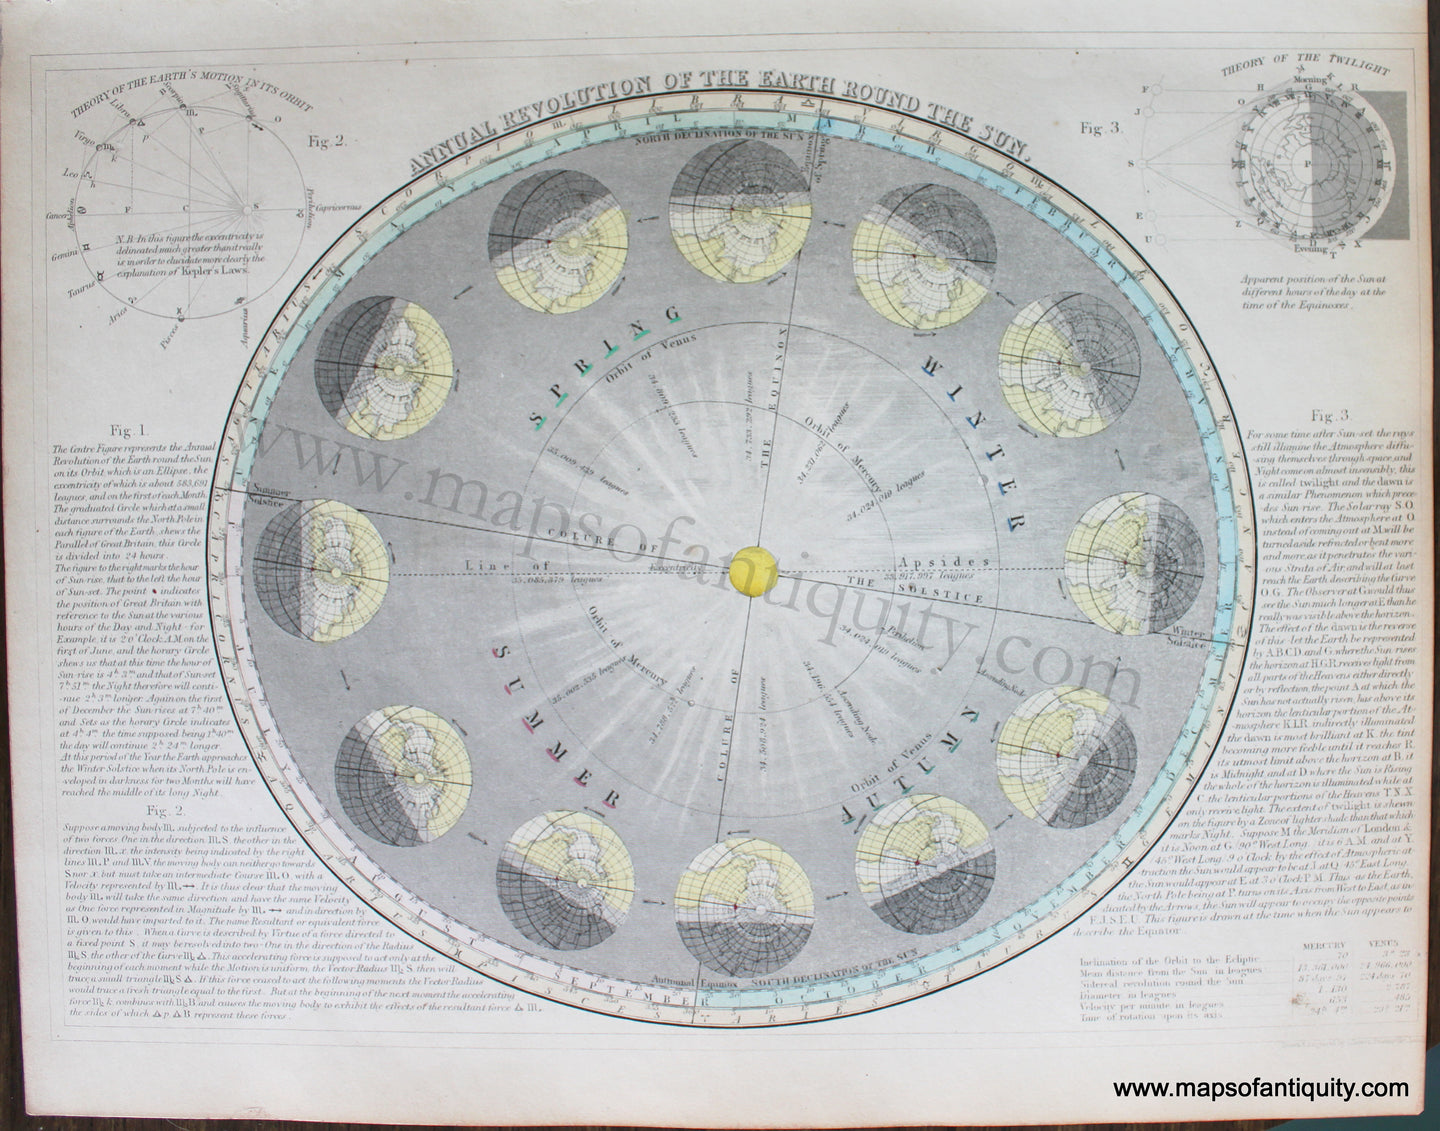 Genuine-Antique-Map-Annual-Revolution-of-the-Earth-Round-the-Sun-Celestial--1850-Petermann-/-Orr-/-Dower-Maps-Of-Antiquity-1800s-19th-century